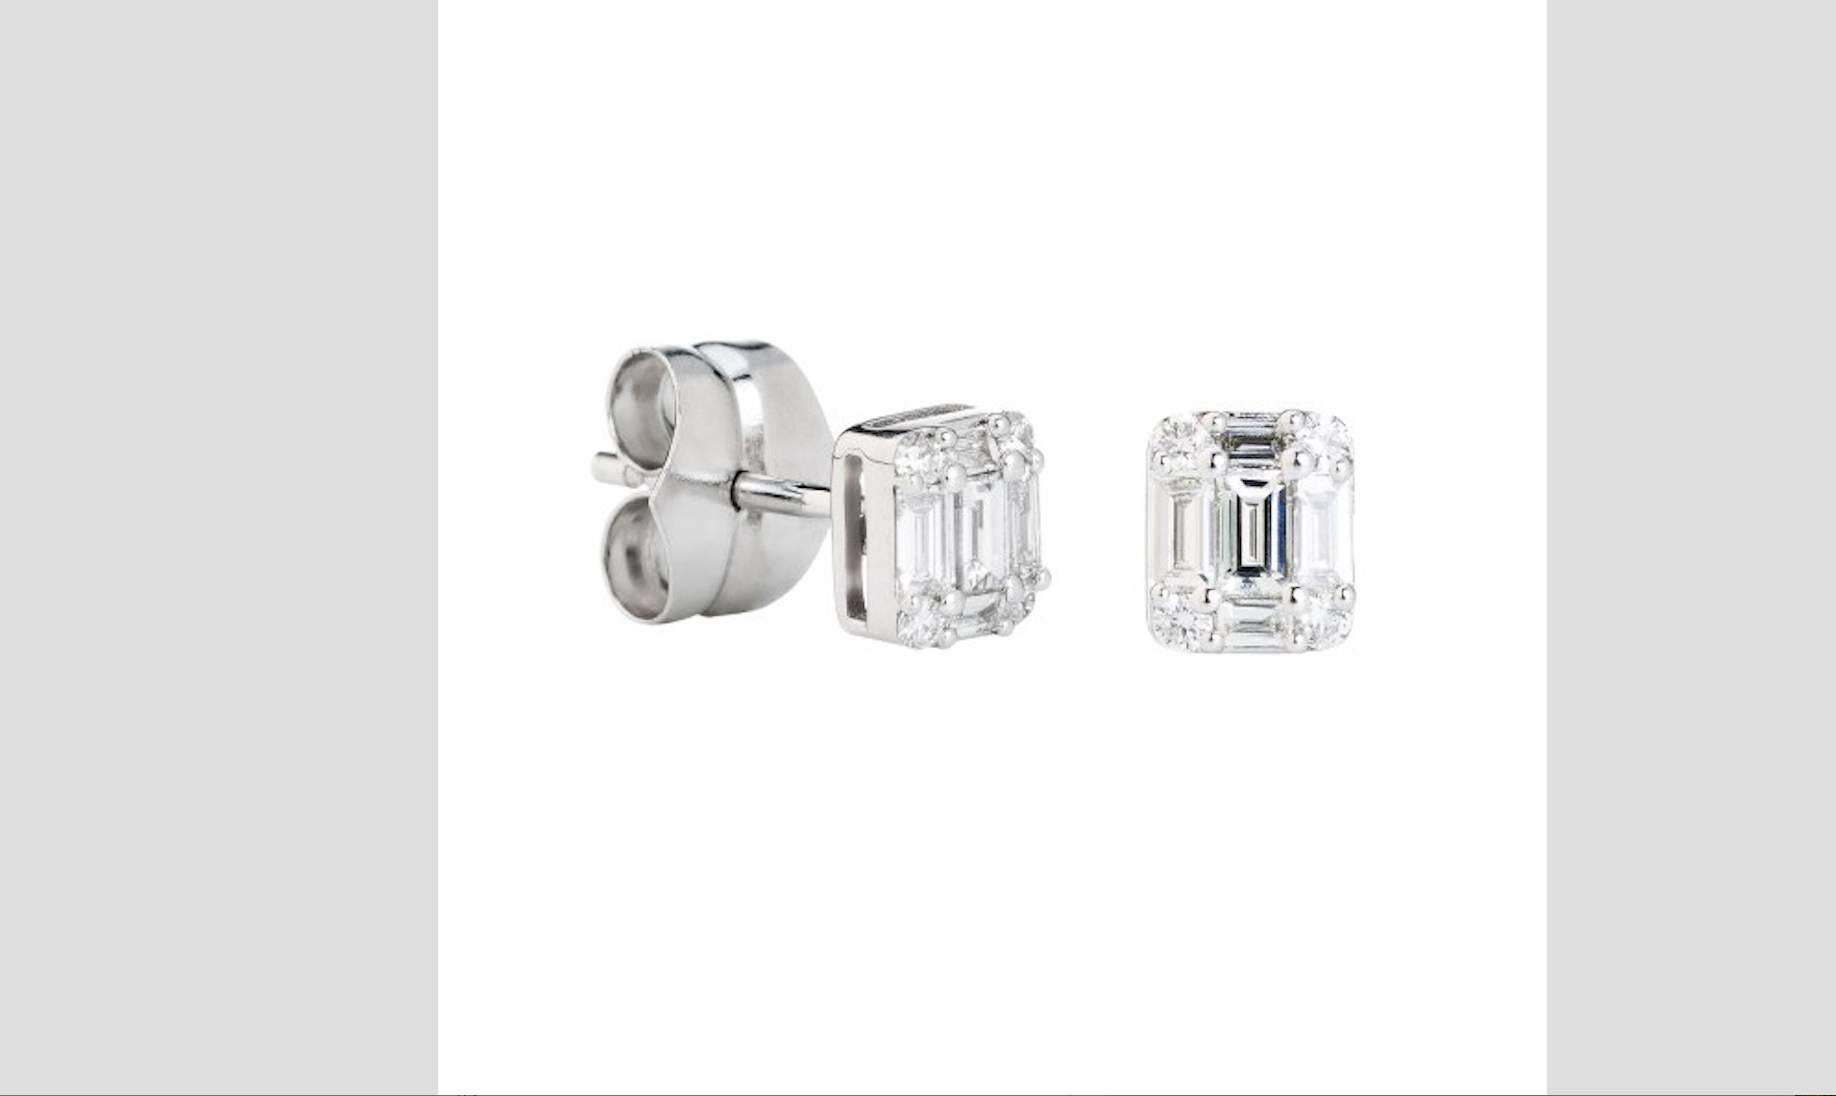 18 Karat White Gold,
White Diamonds with Baguette Cut
together 0.33 ct